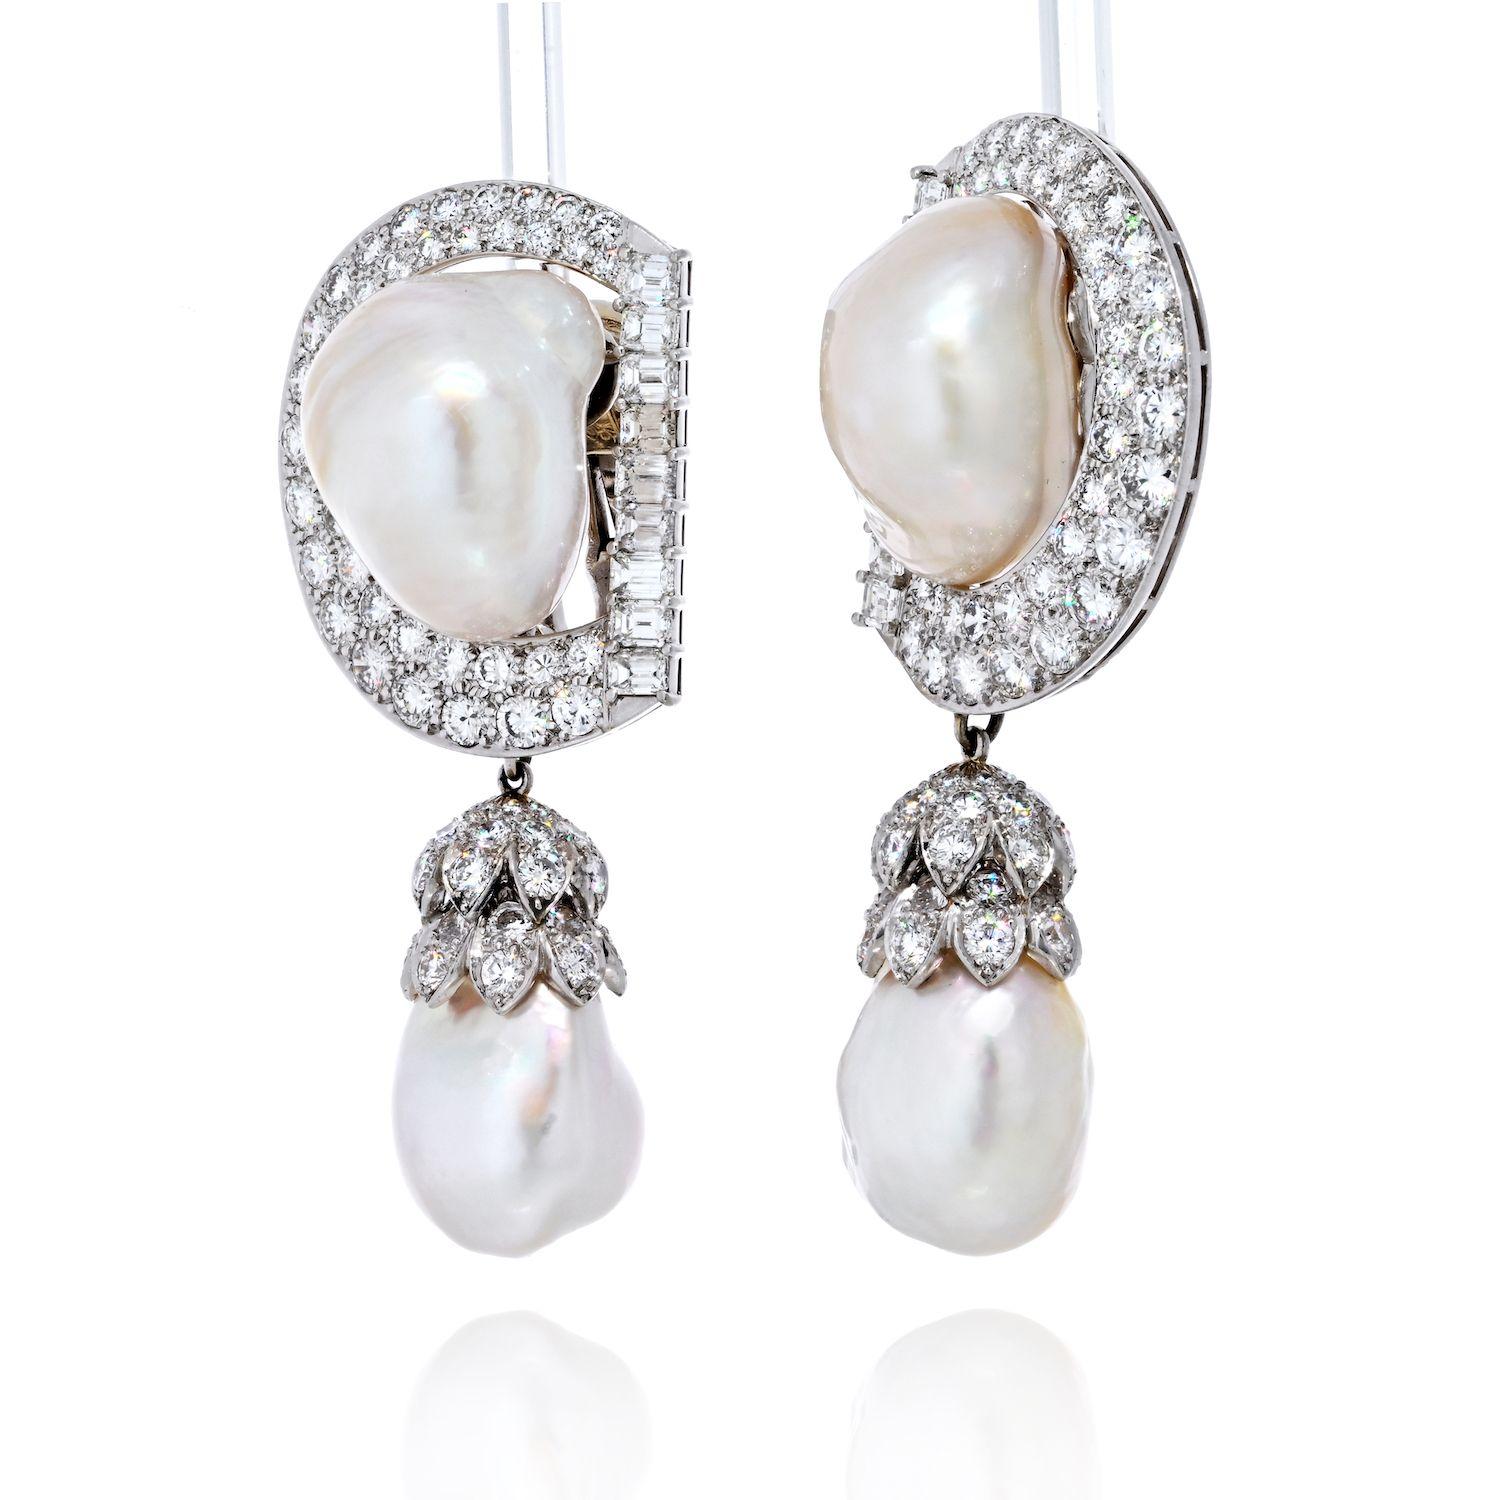 The David Webb Baroque Pearl and Diamond Drop Earrings in platinum exemplify the designer's mastery in creating breathtaking and unique pieces. This exquisite pair of earrings seamlessly blends the organic beauty of large baroque pearls with the